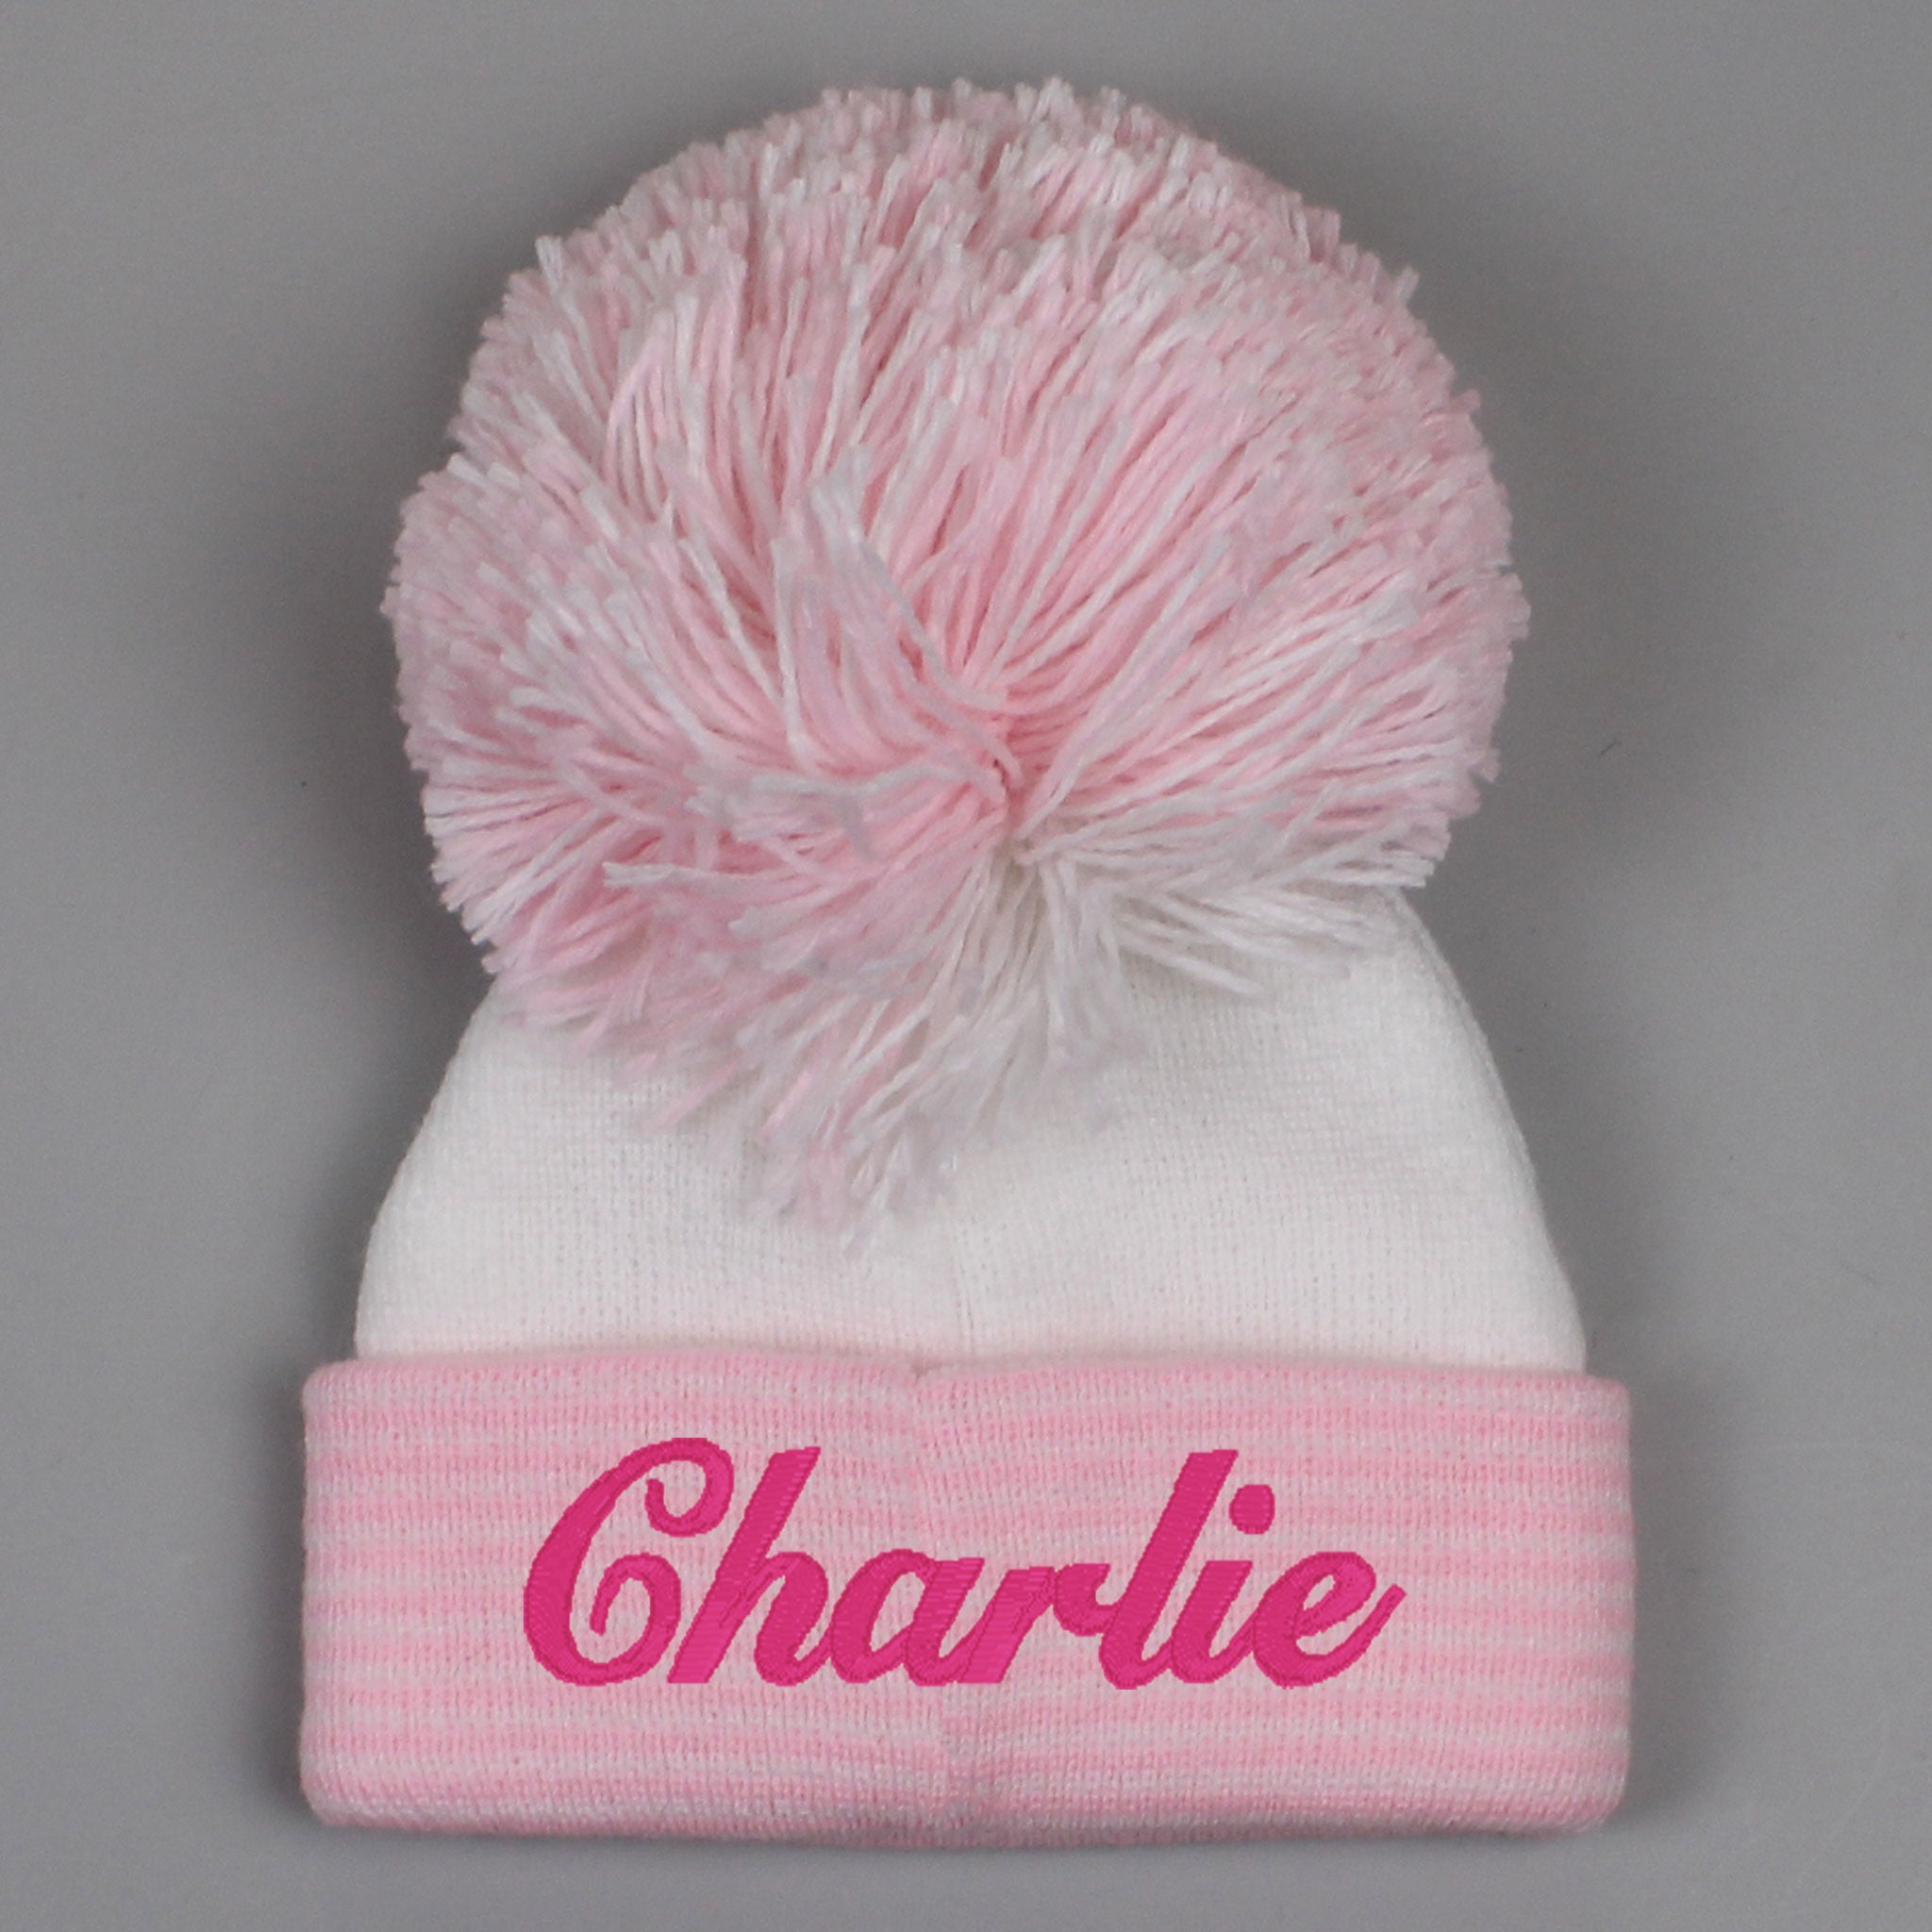 baby girls custom name pom hat in white and pink